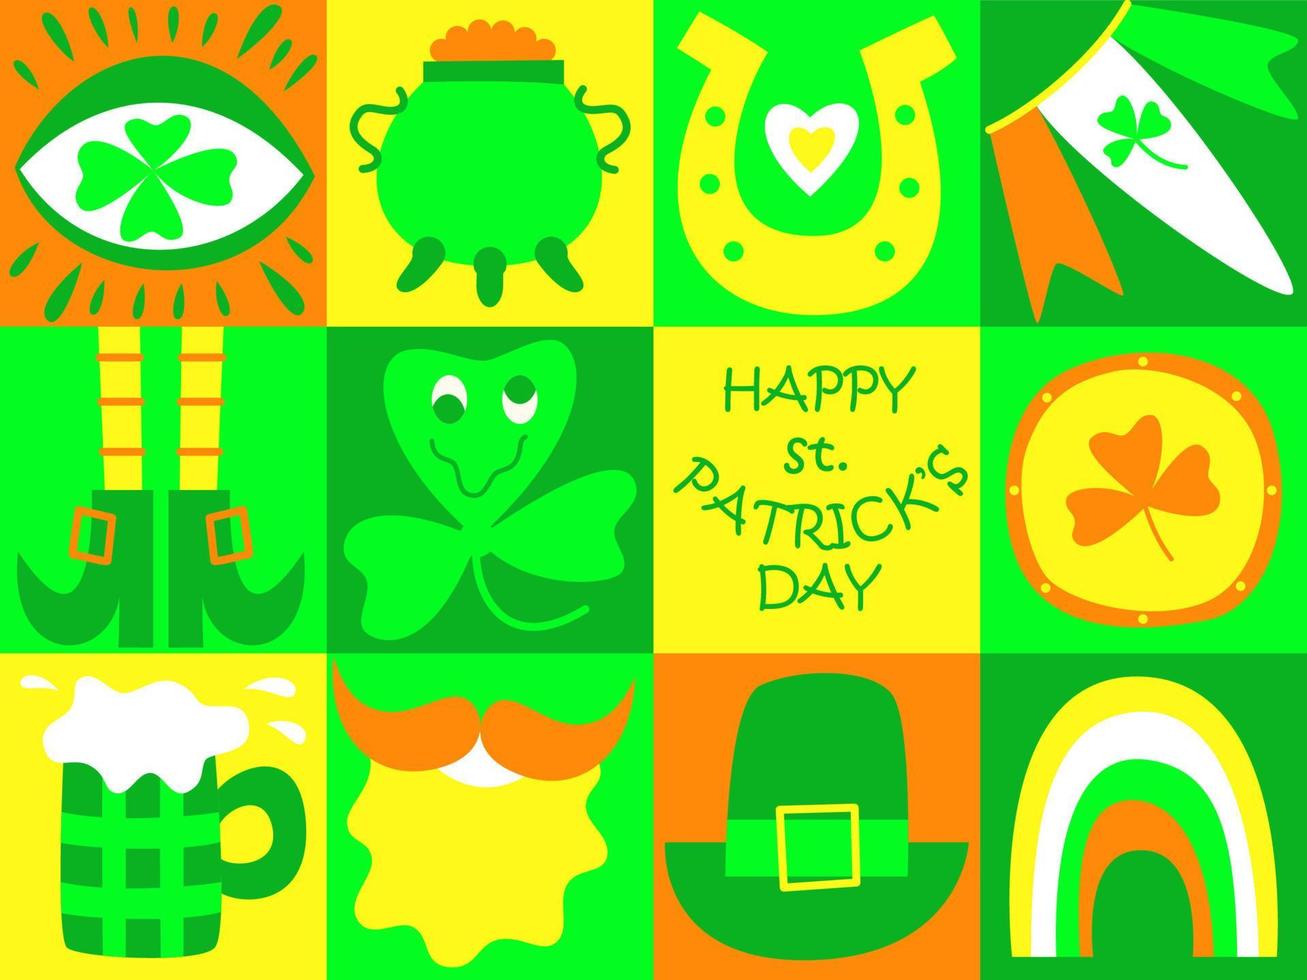 St Patrick's Day doodle poster. Trippy style. Fun Irish holiday celebration. Great for greeting card, invitation, print, t-shirts, background, festive decor. Trendy y2k retro hippie print. Flat vector